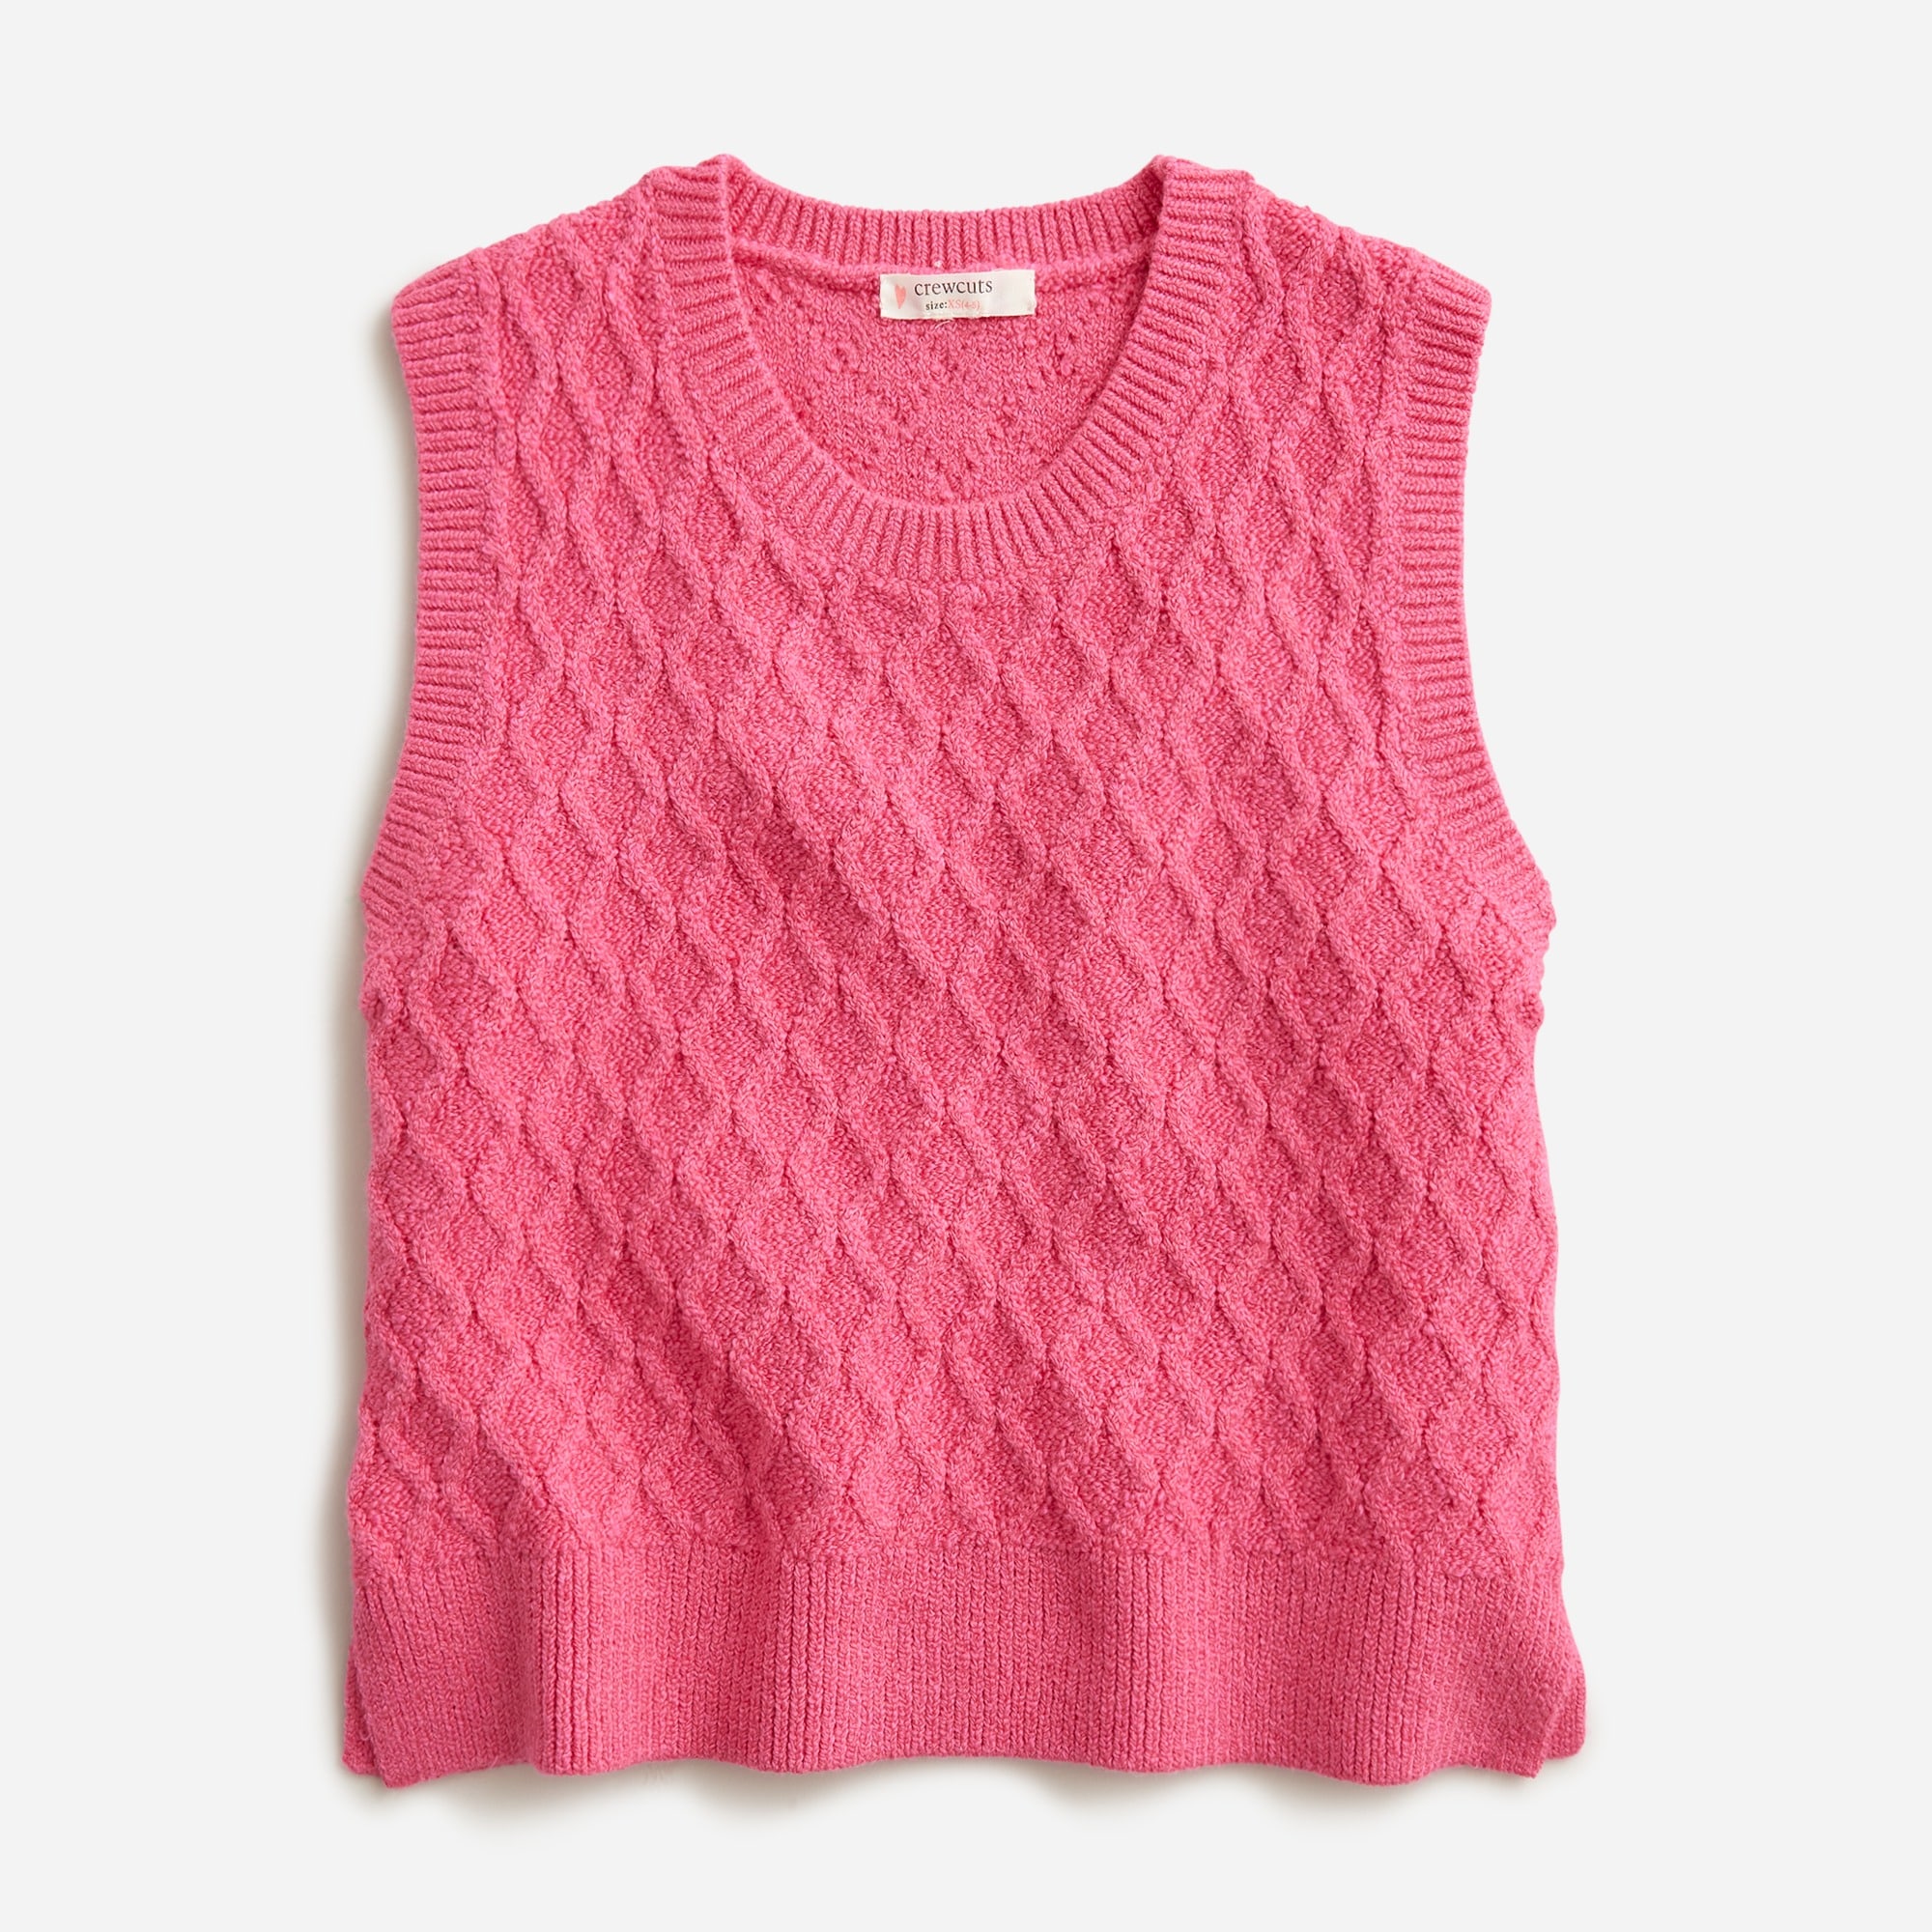  Girls' cable-knit sweater-vest